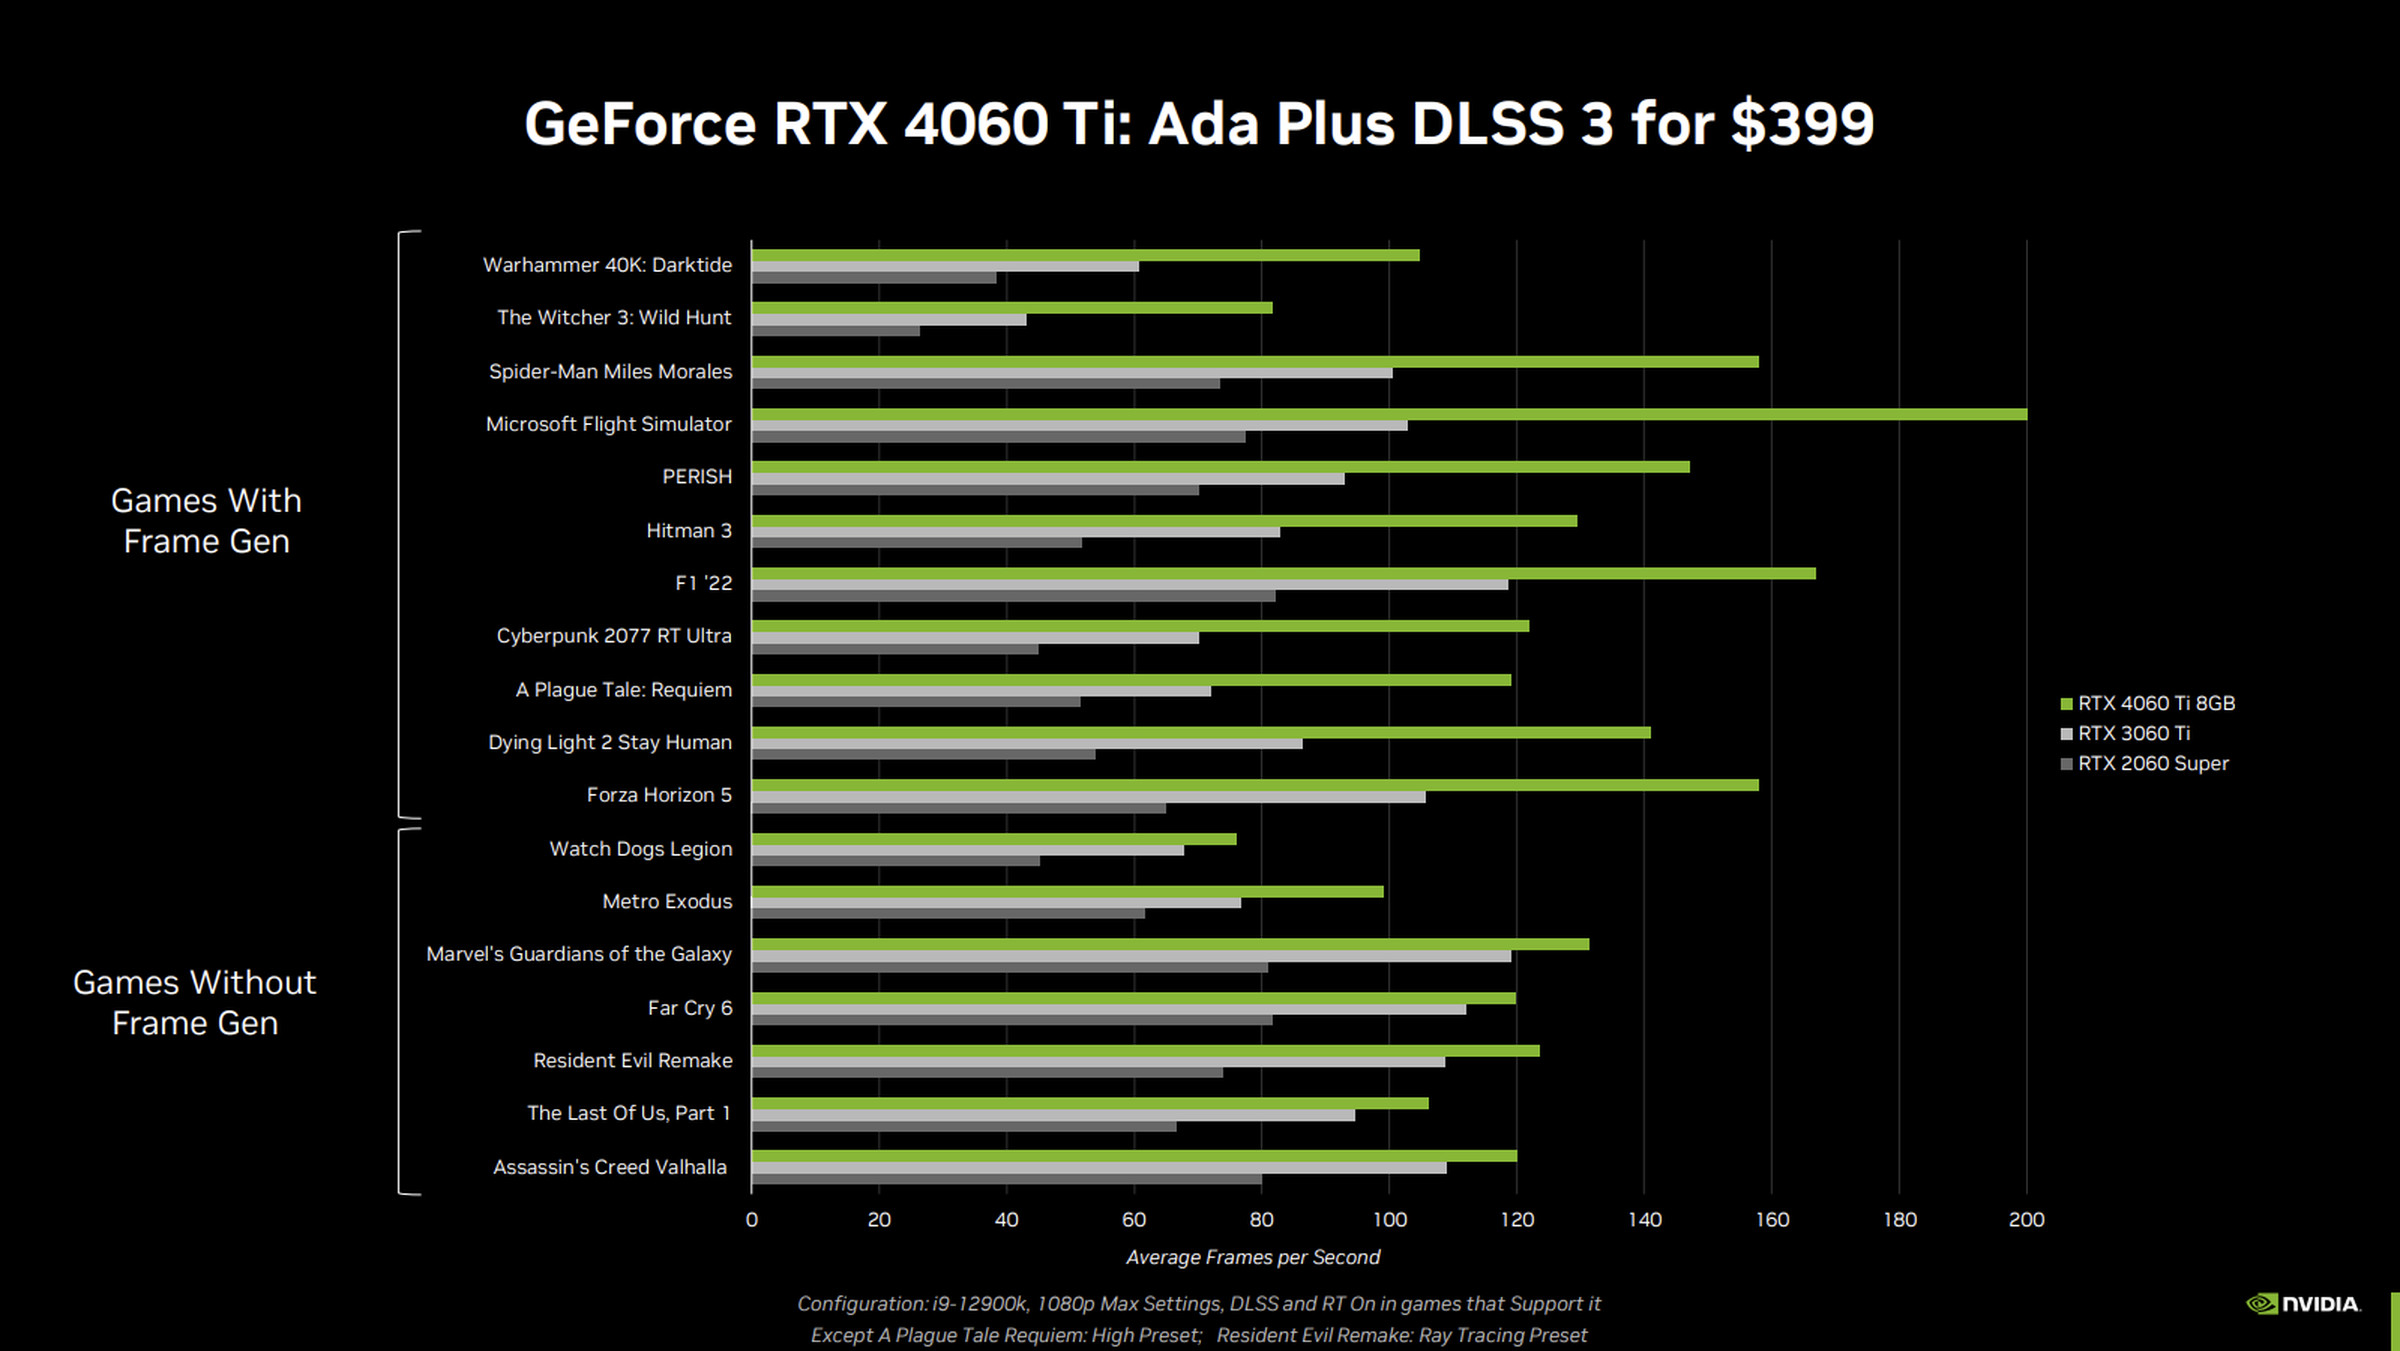 Nvidia’s performance data shows a smaller gap over the RTX 3060 Ti with non-DLSS 3 games.